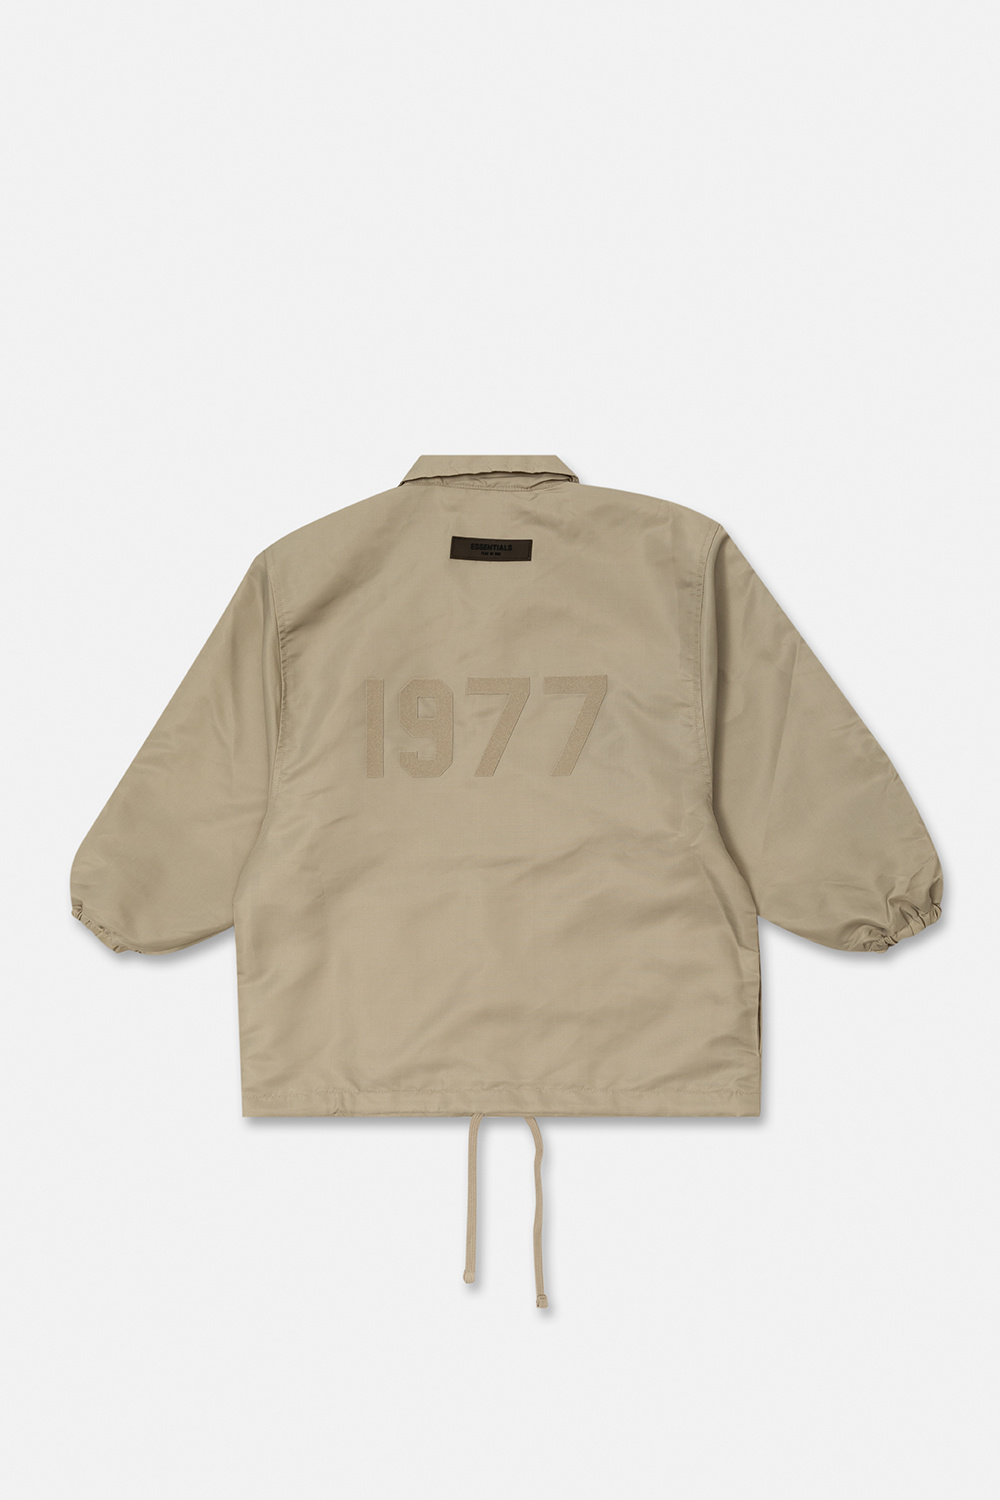 Fear Of God Essentials Kids Jacket with logo